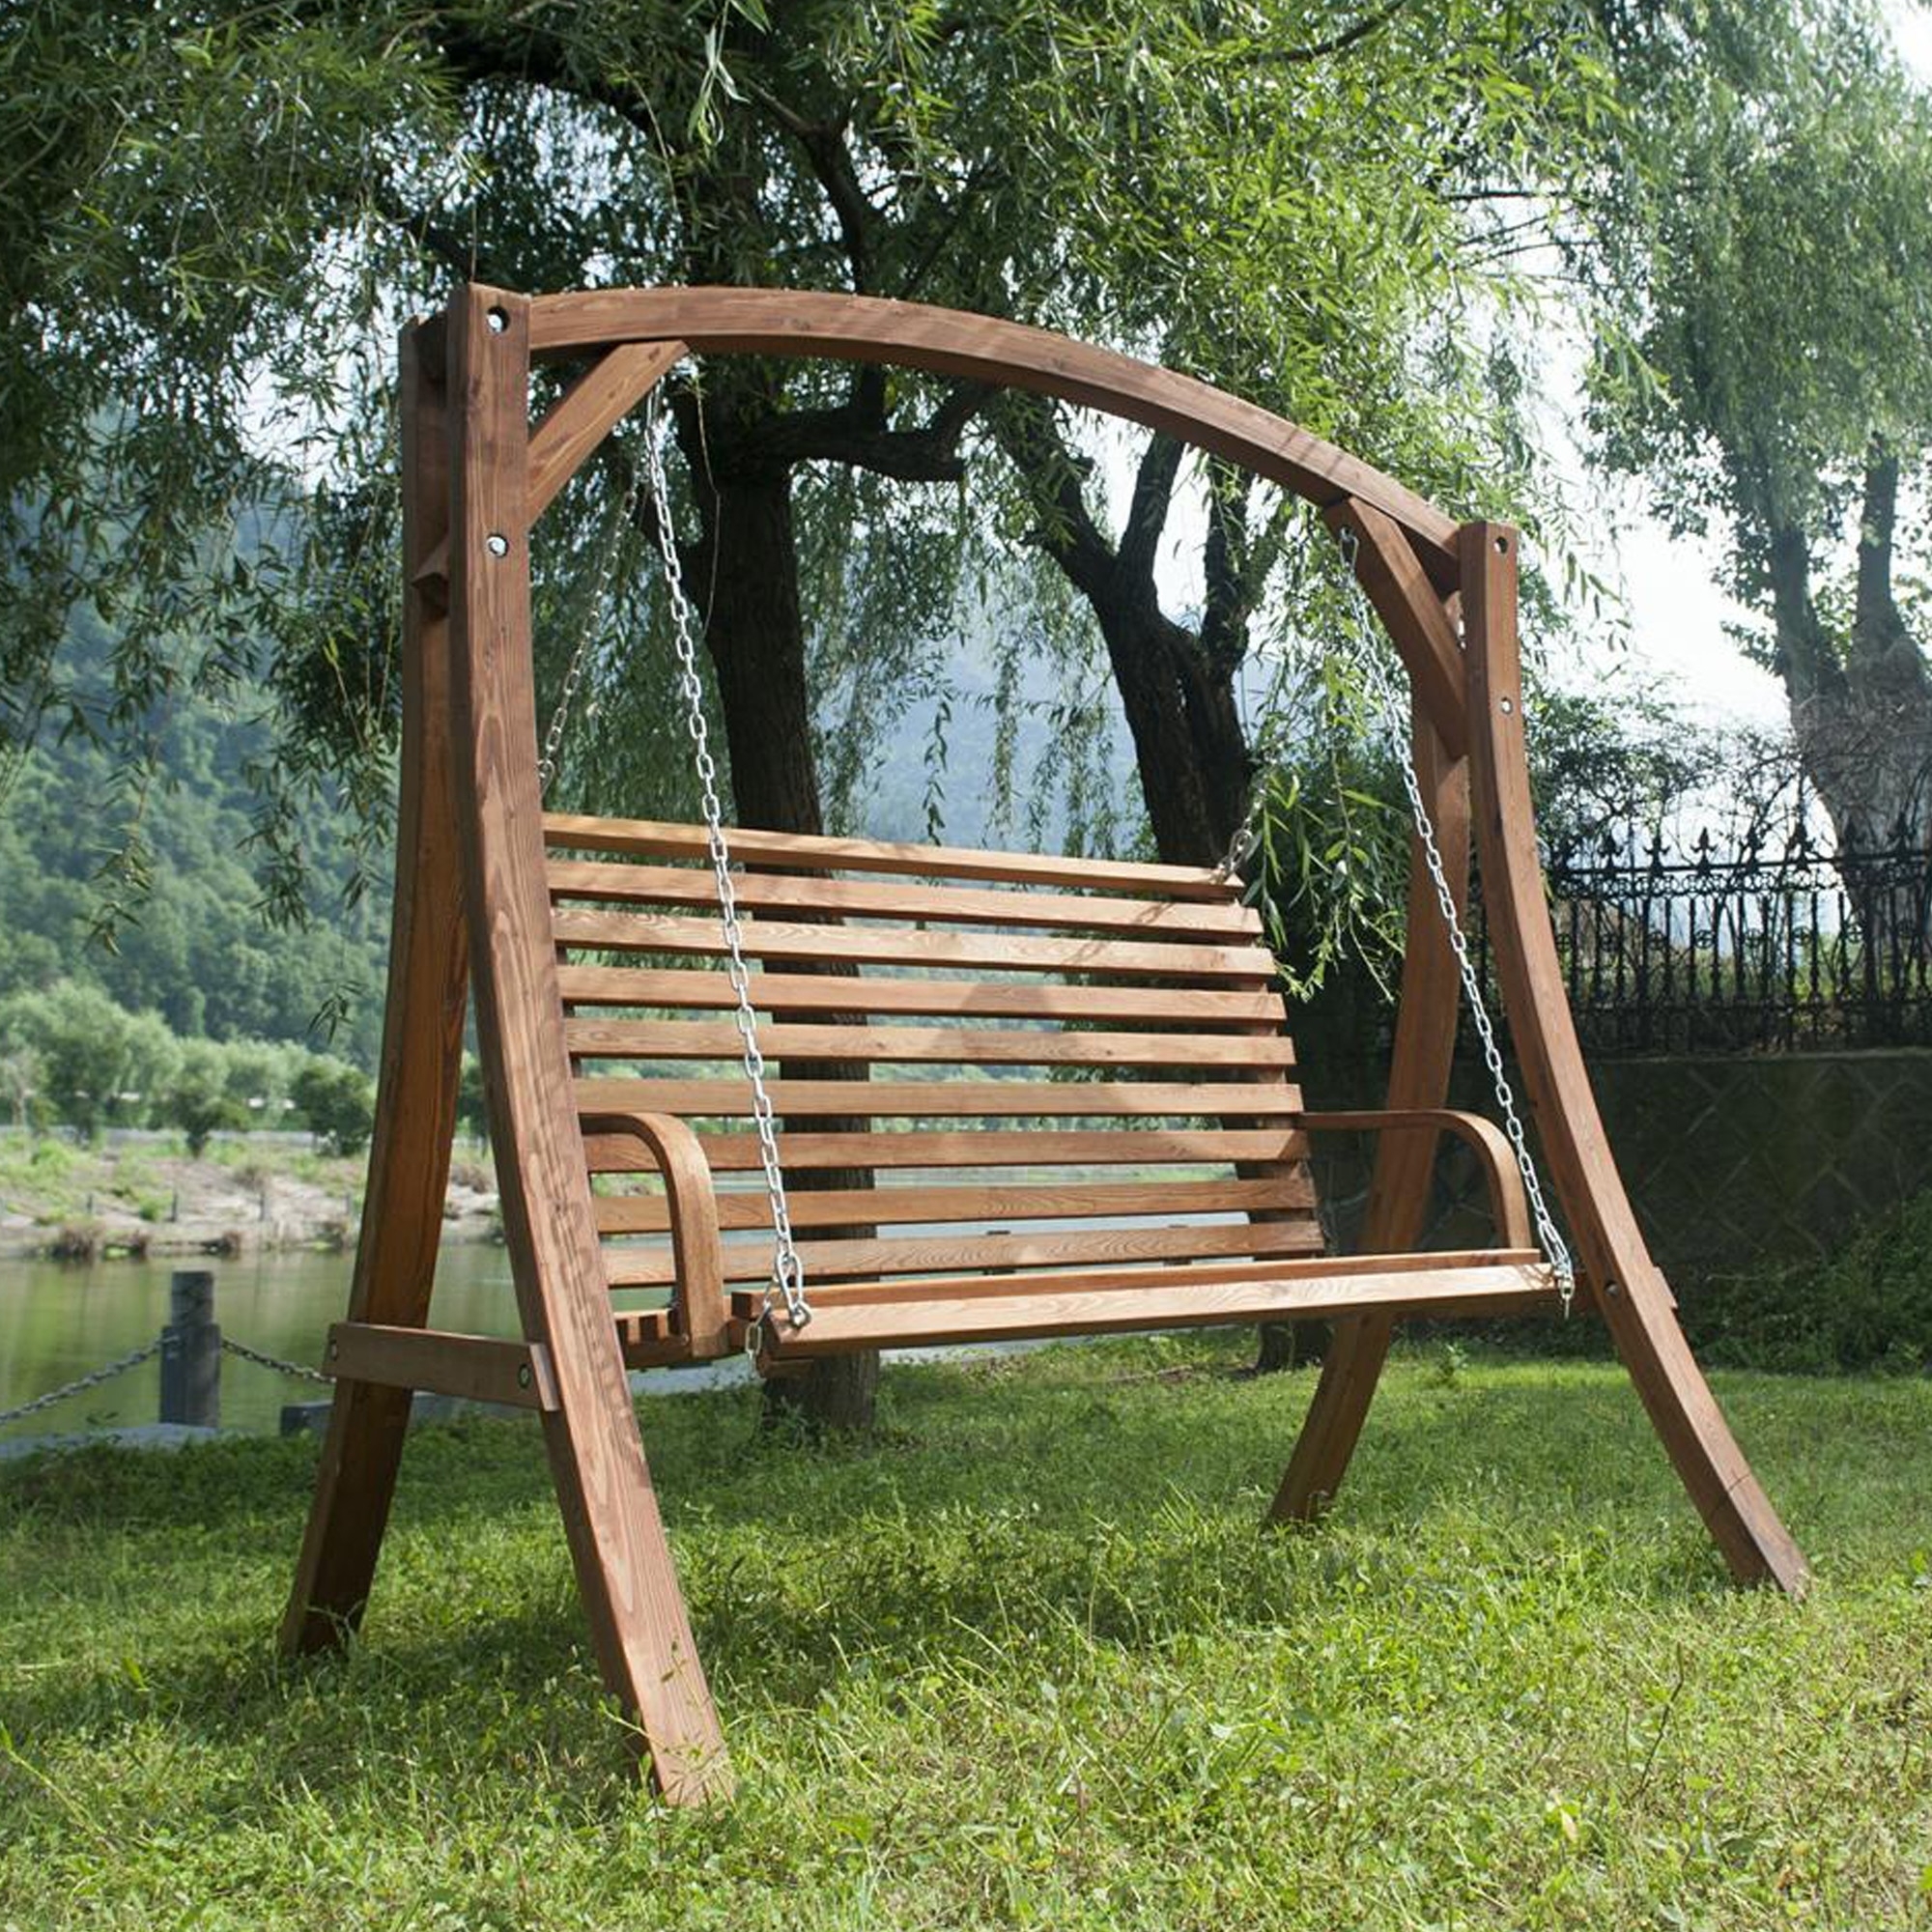 Amazing Awesome Wooden Garden Swings for Adults AID0I wooden garden swings for adults